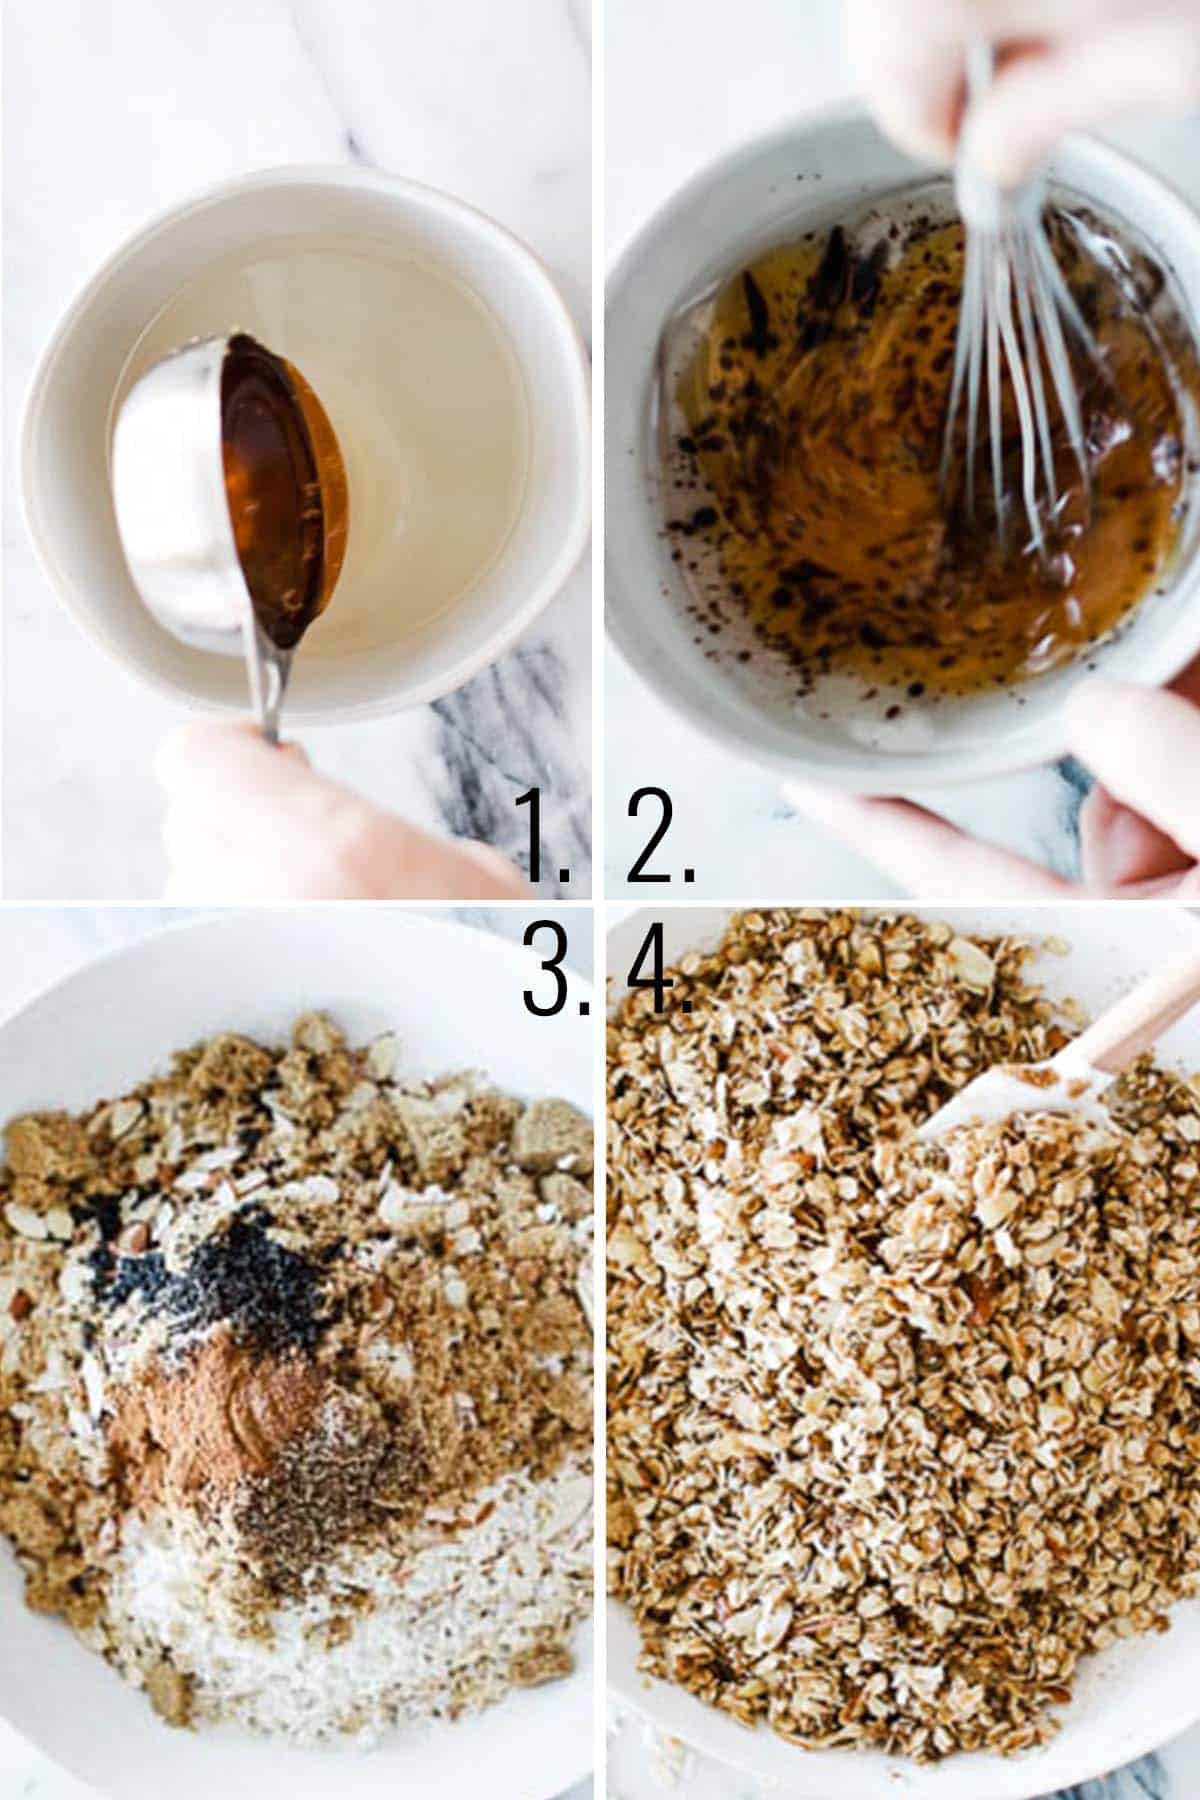 A collage showing the steps for making homemade granola.